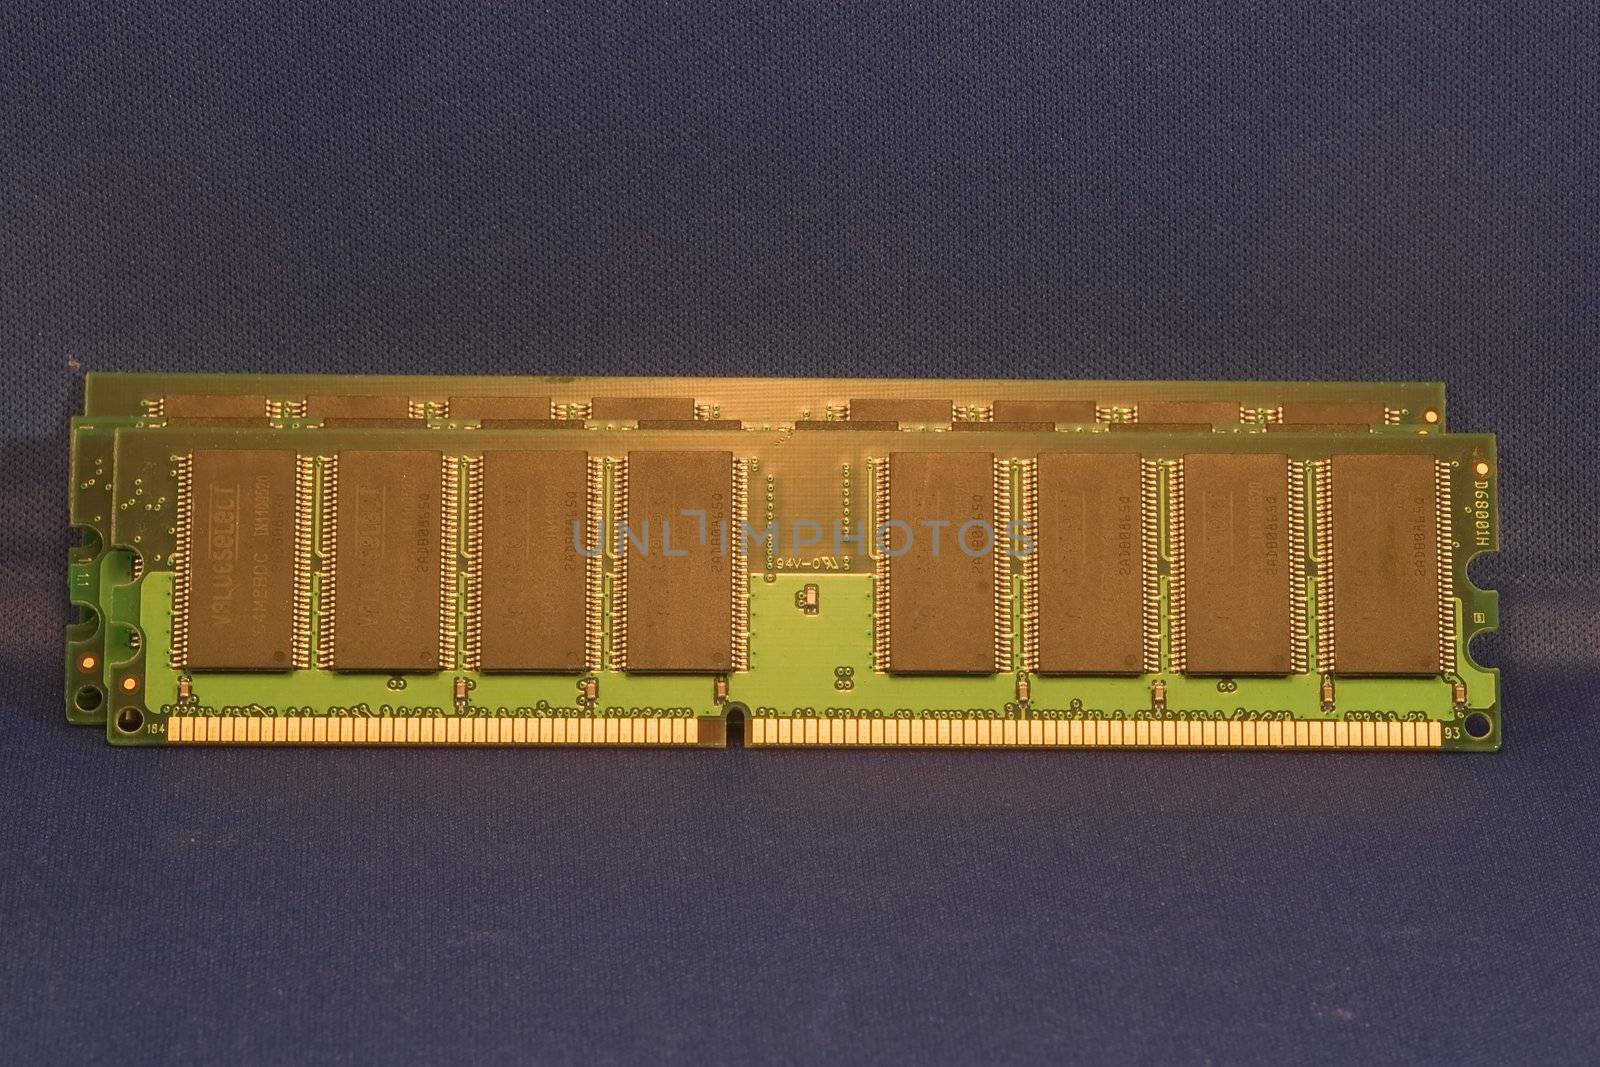 A SIMM, or single in-line memory module, is a type of memory module used for random access memory.